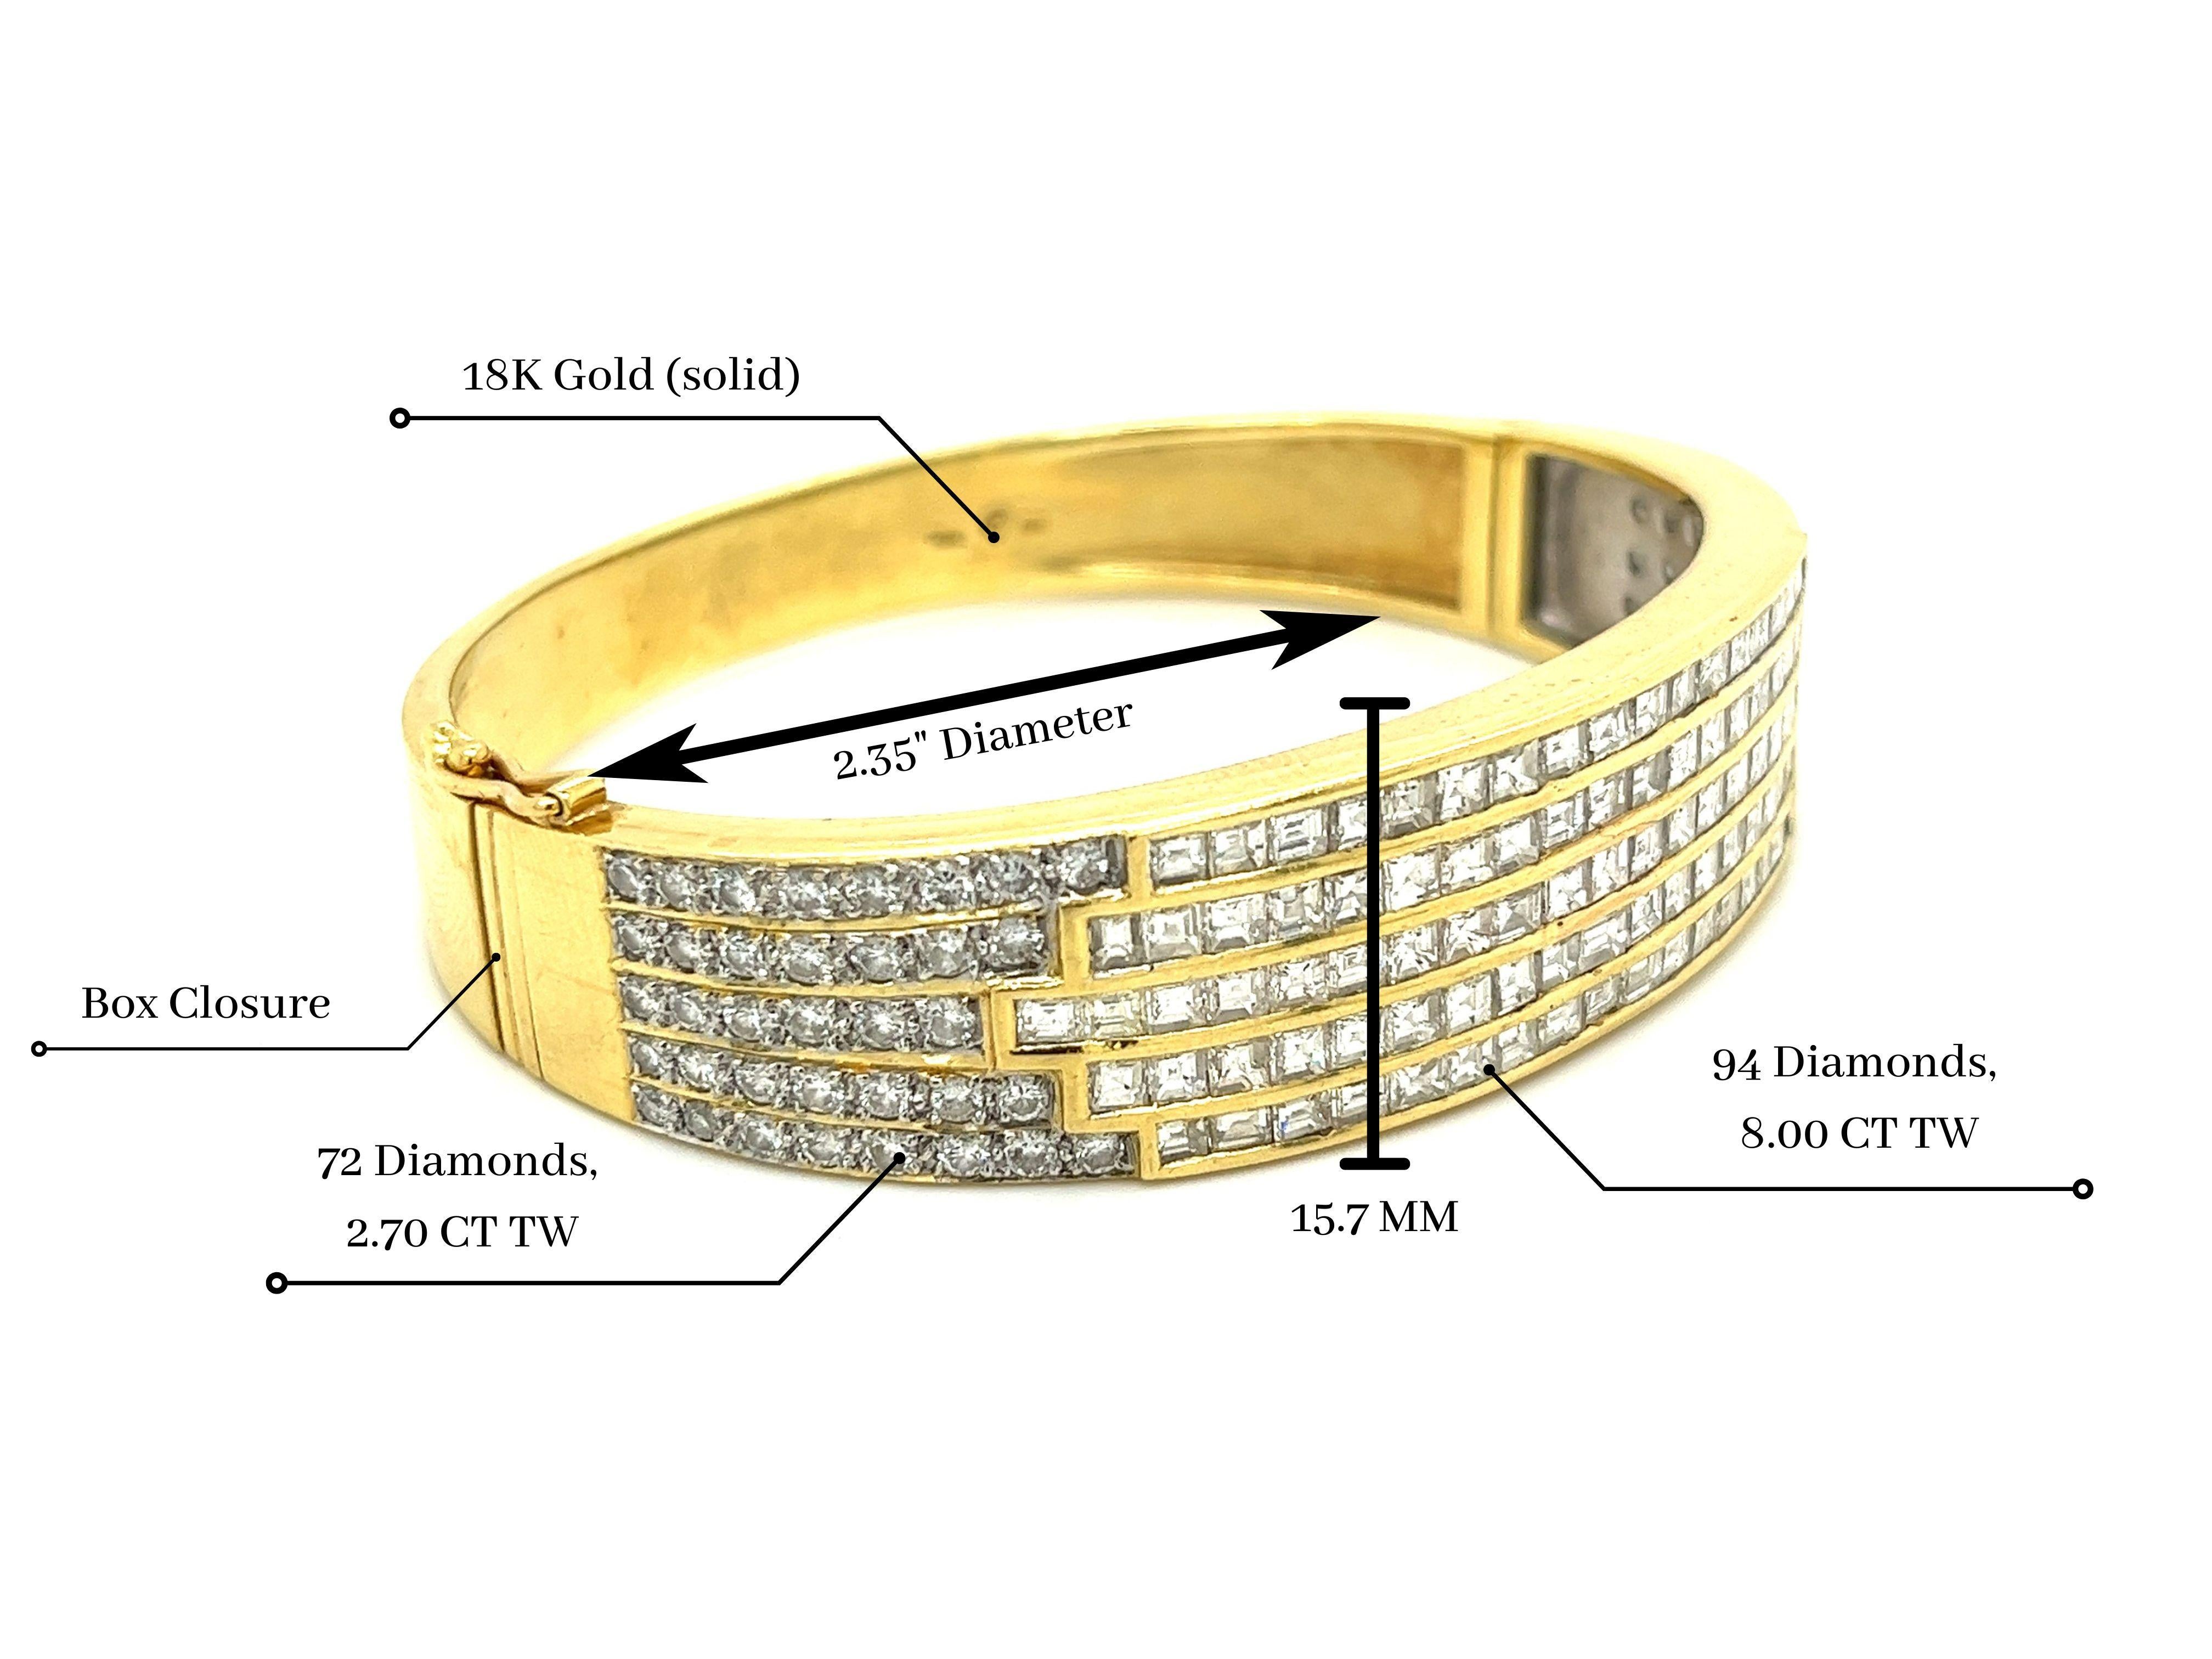 10 Carat Baguette Cut Multi-Row Diamond Encrusted Bangle Bracelet in 18k Gold In New Condition For Sale In Miami, FL